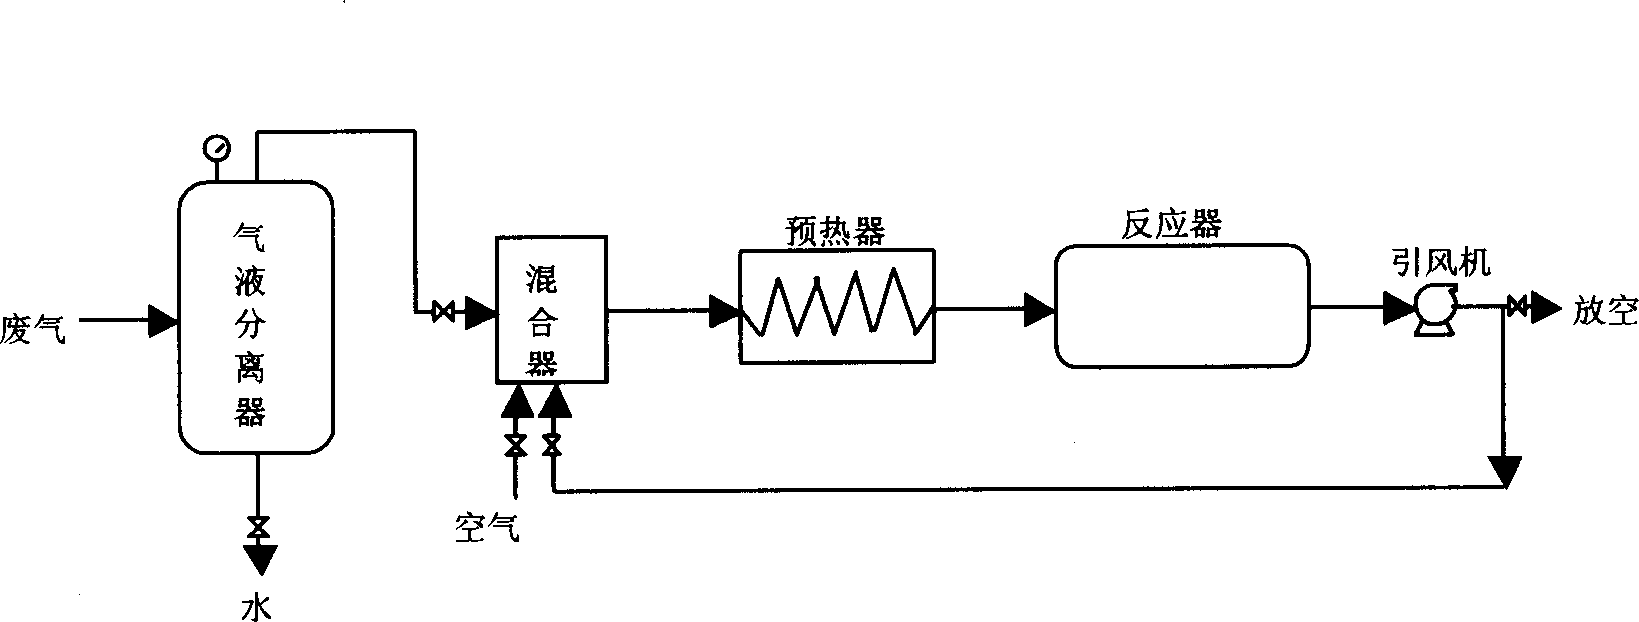 Waste polyester gas purification